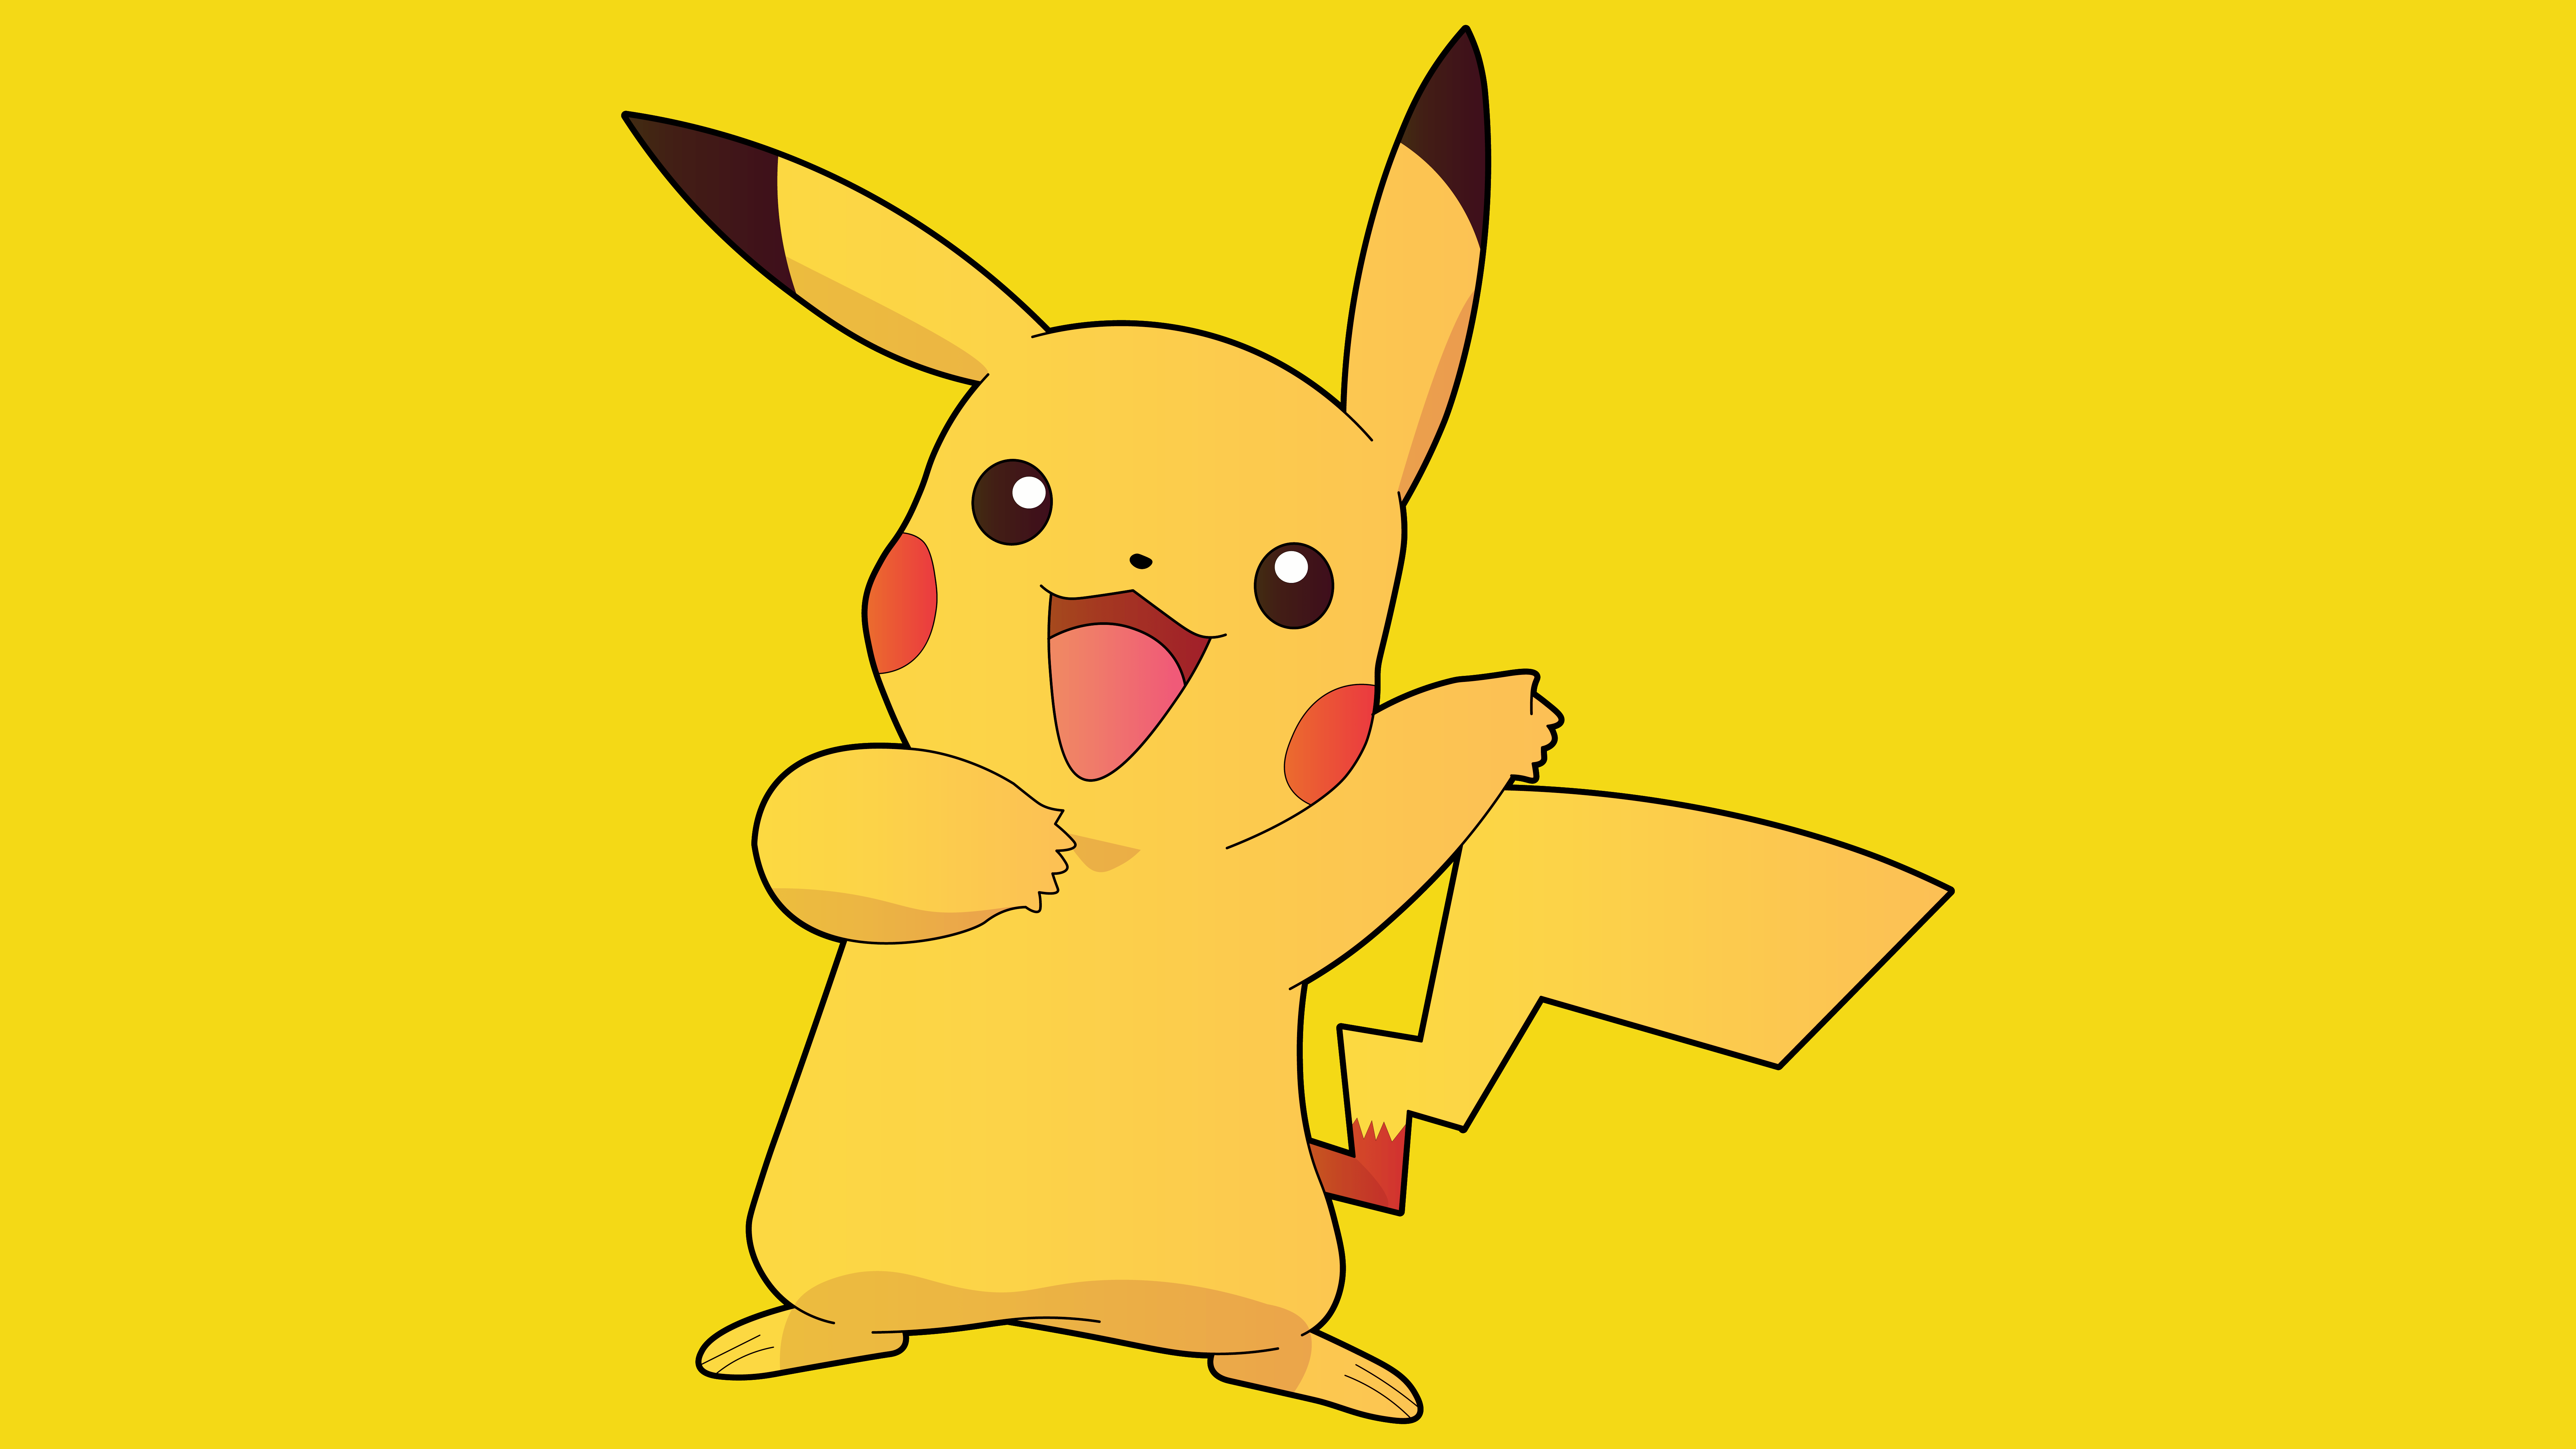 A picture of Pikachu from Pokemon - Pikachu